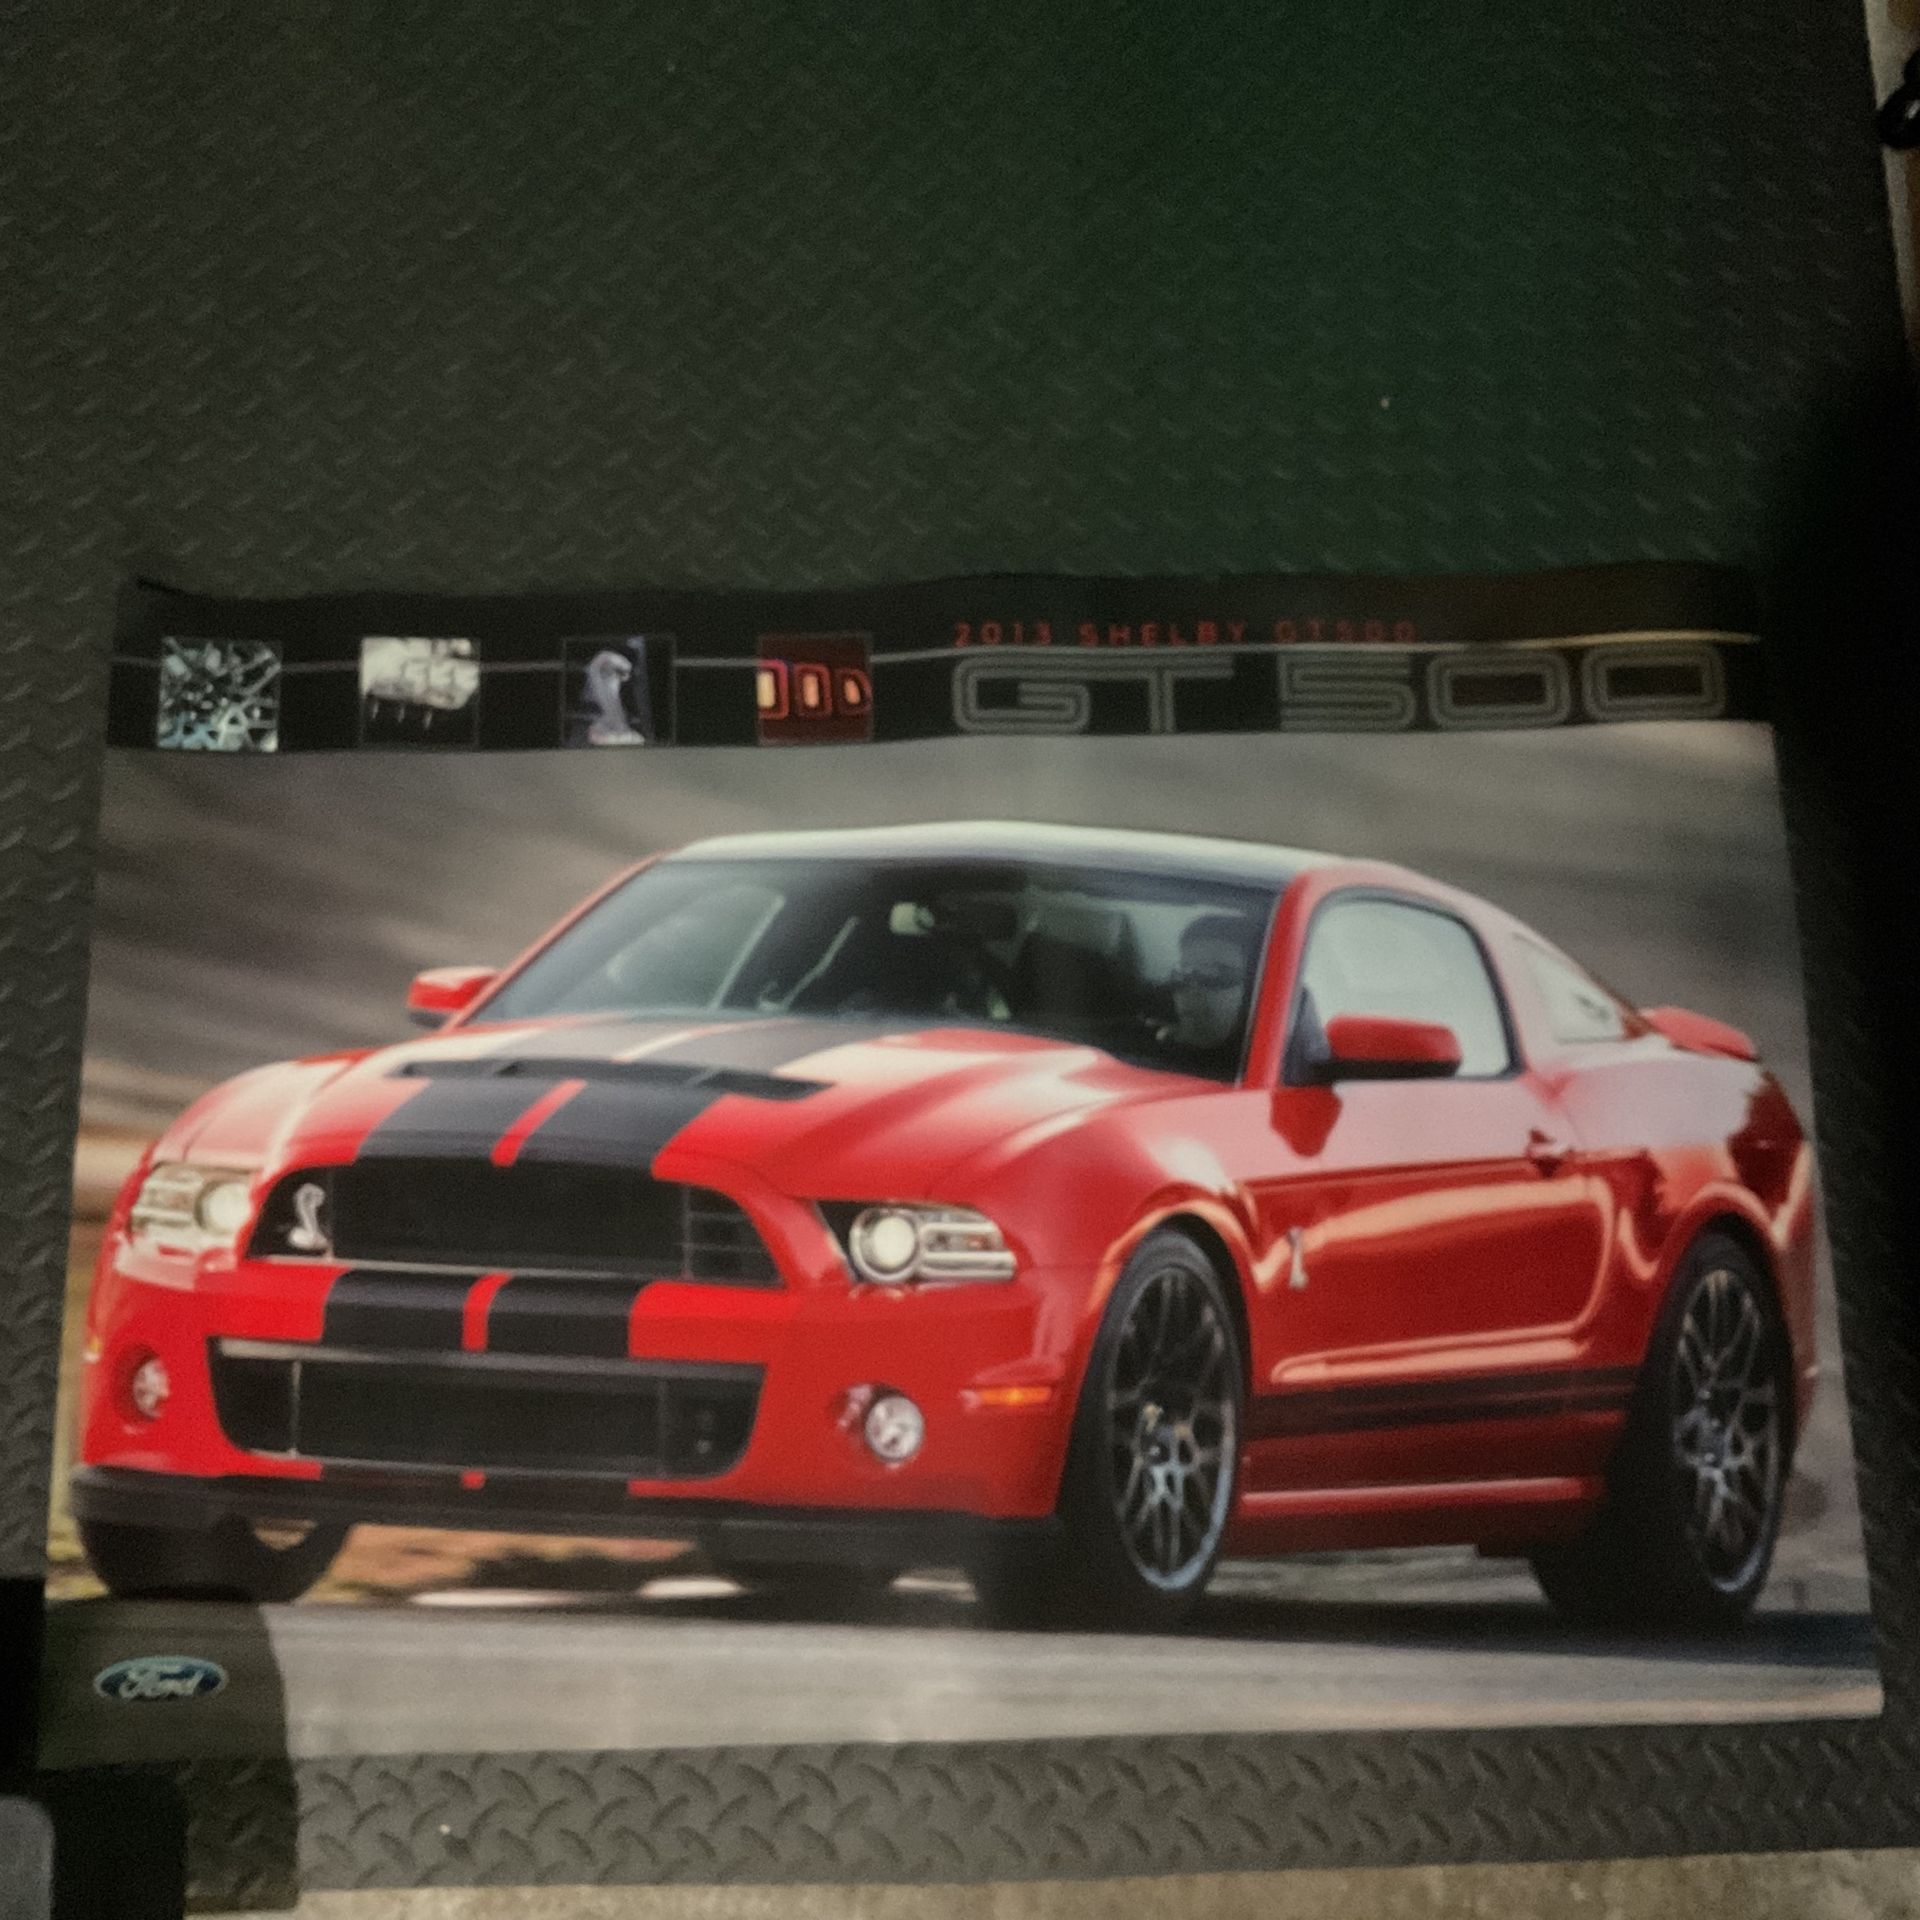 FORD MUSTANG SHELBY DEALERSHIP POSTERS (3ft By 2ft) $5